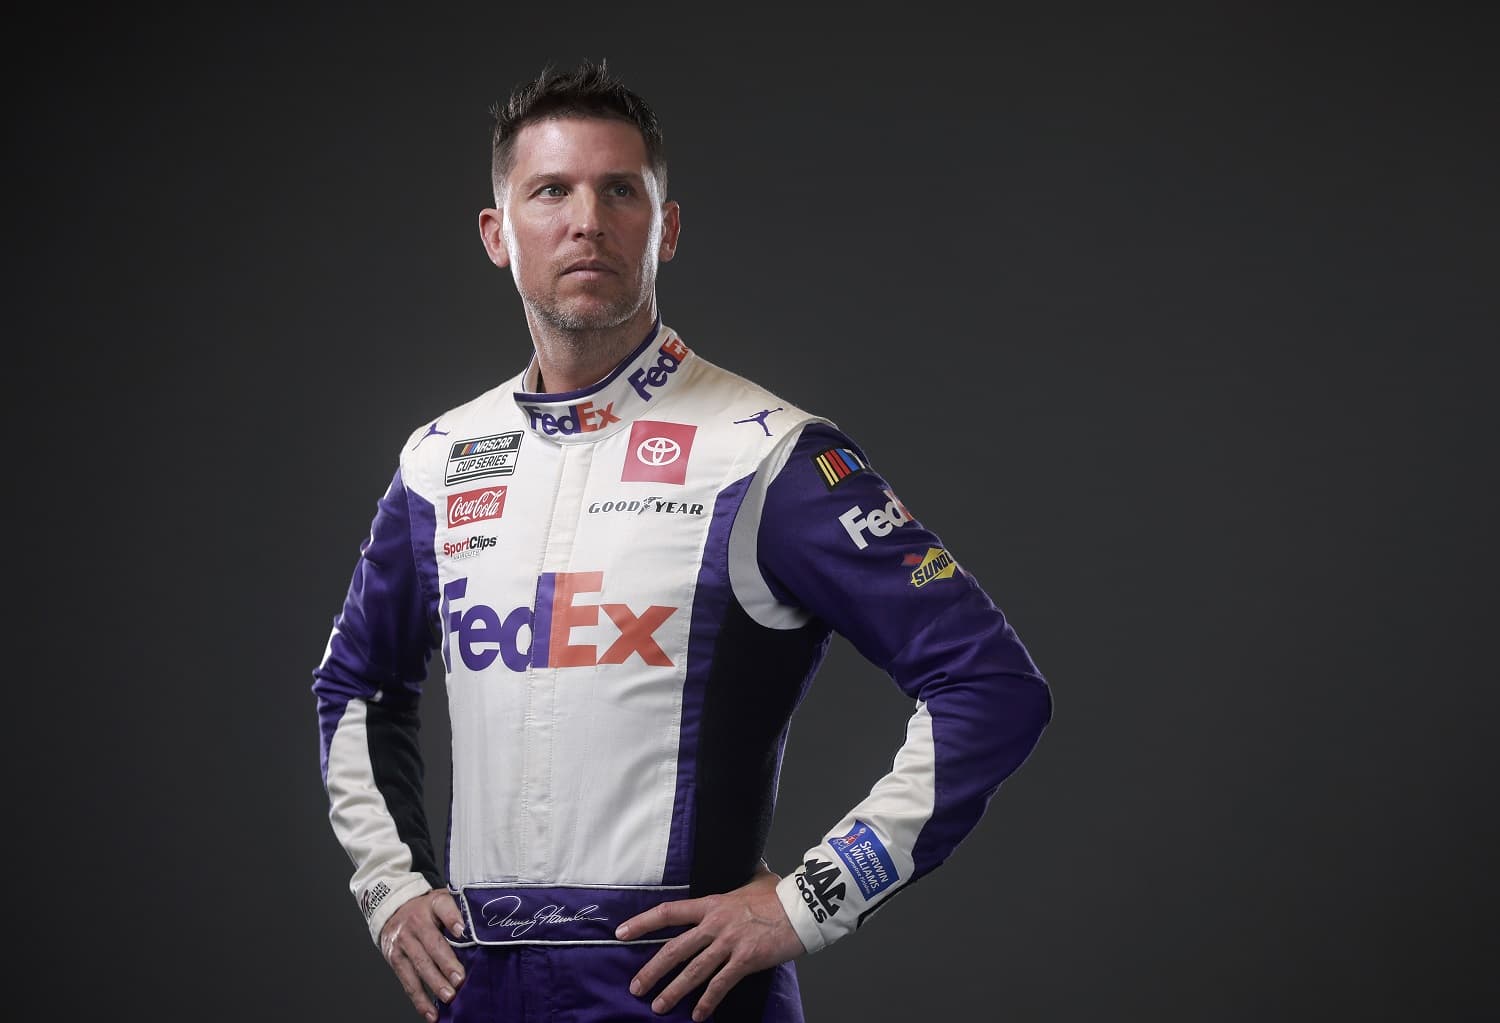 NASCAR driver Denny Hamlin poses for a photo during NASCAR Production Days at Charlotte Convention Center on Jan. 18, 2023. | Jared C. Tilton/Getty Images